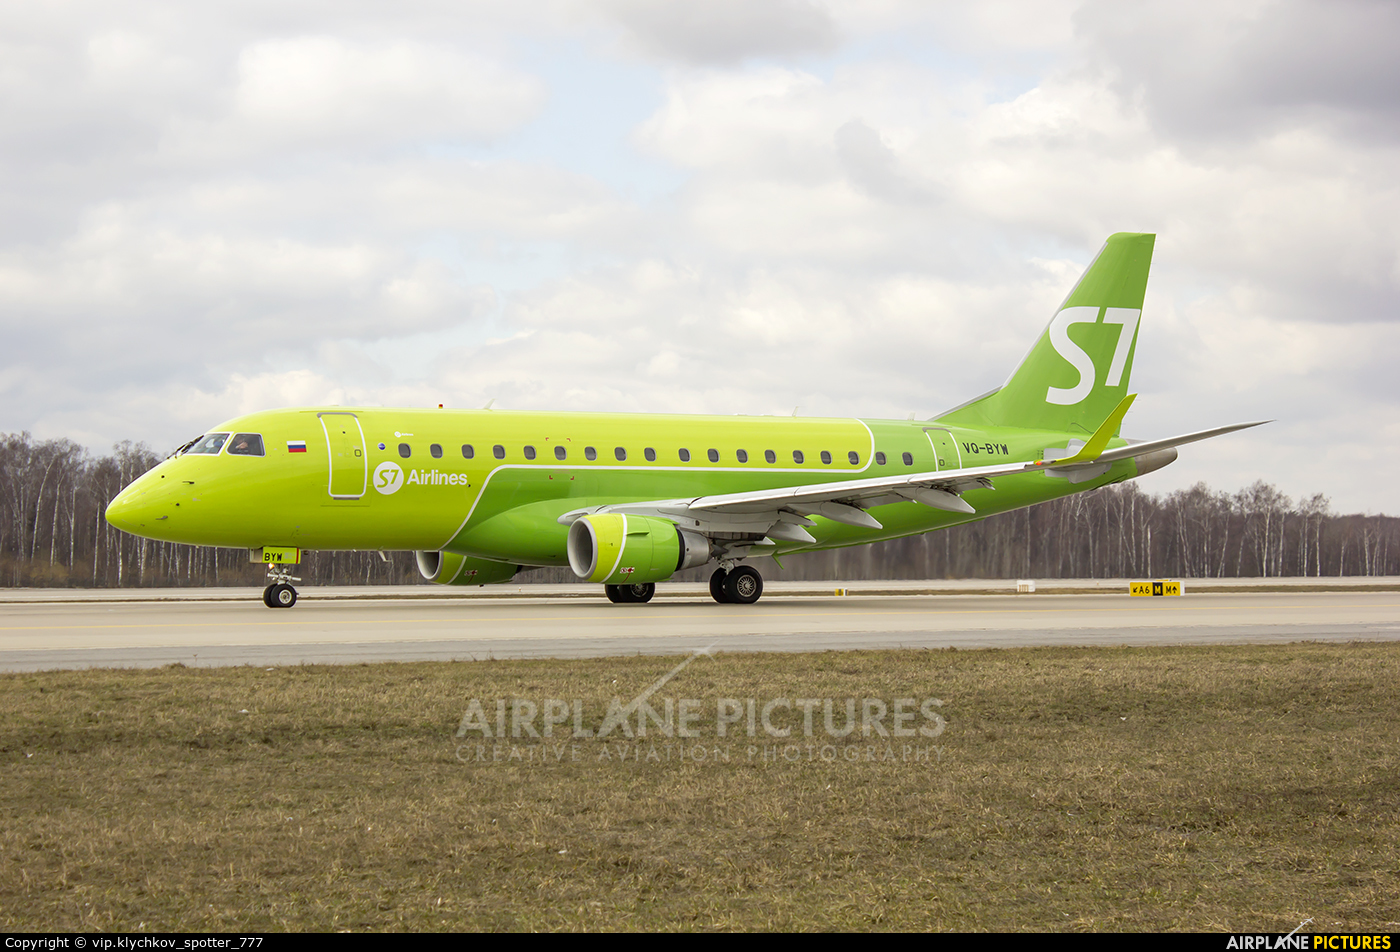 S7 Airlines VQ-BYW aircraft at Moscow - Domodedovo